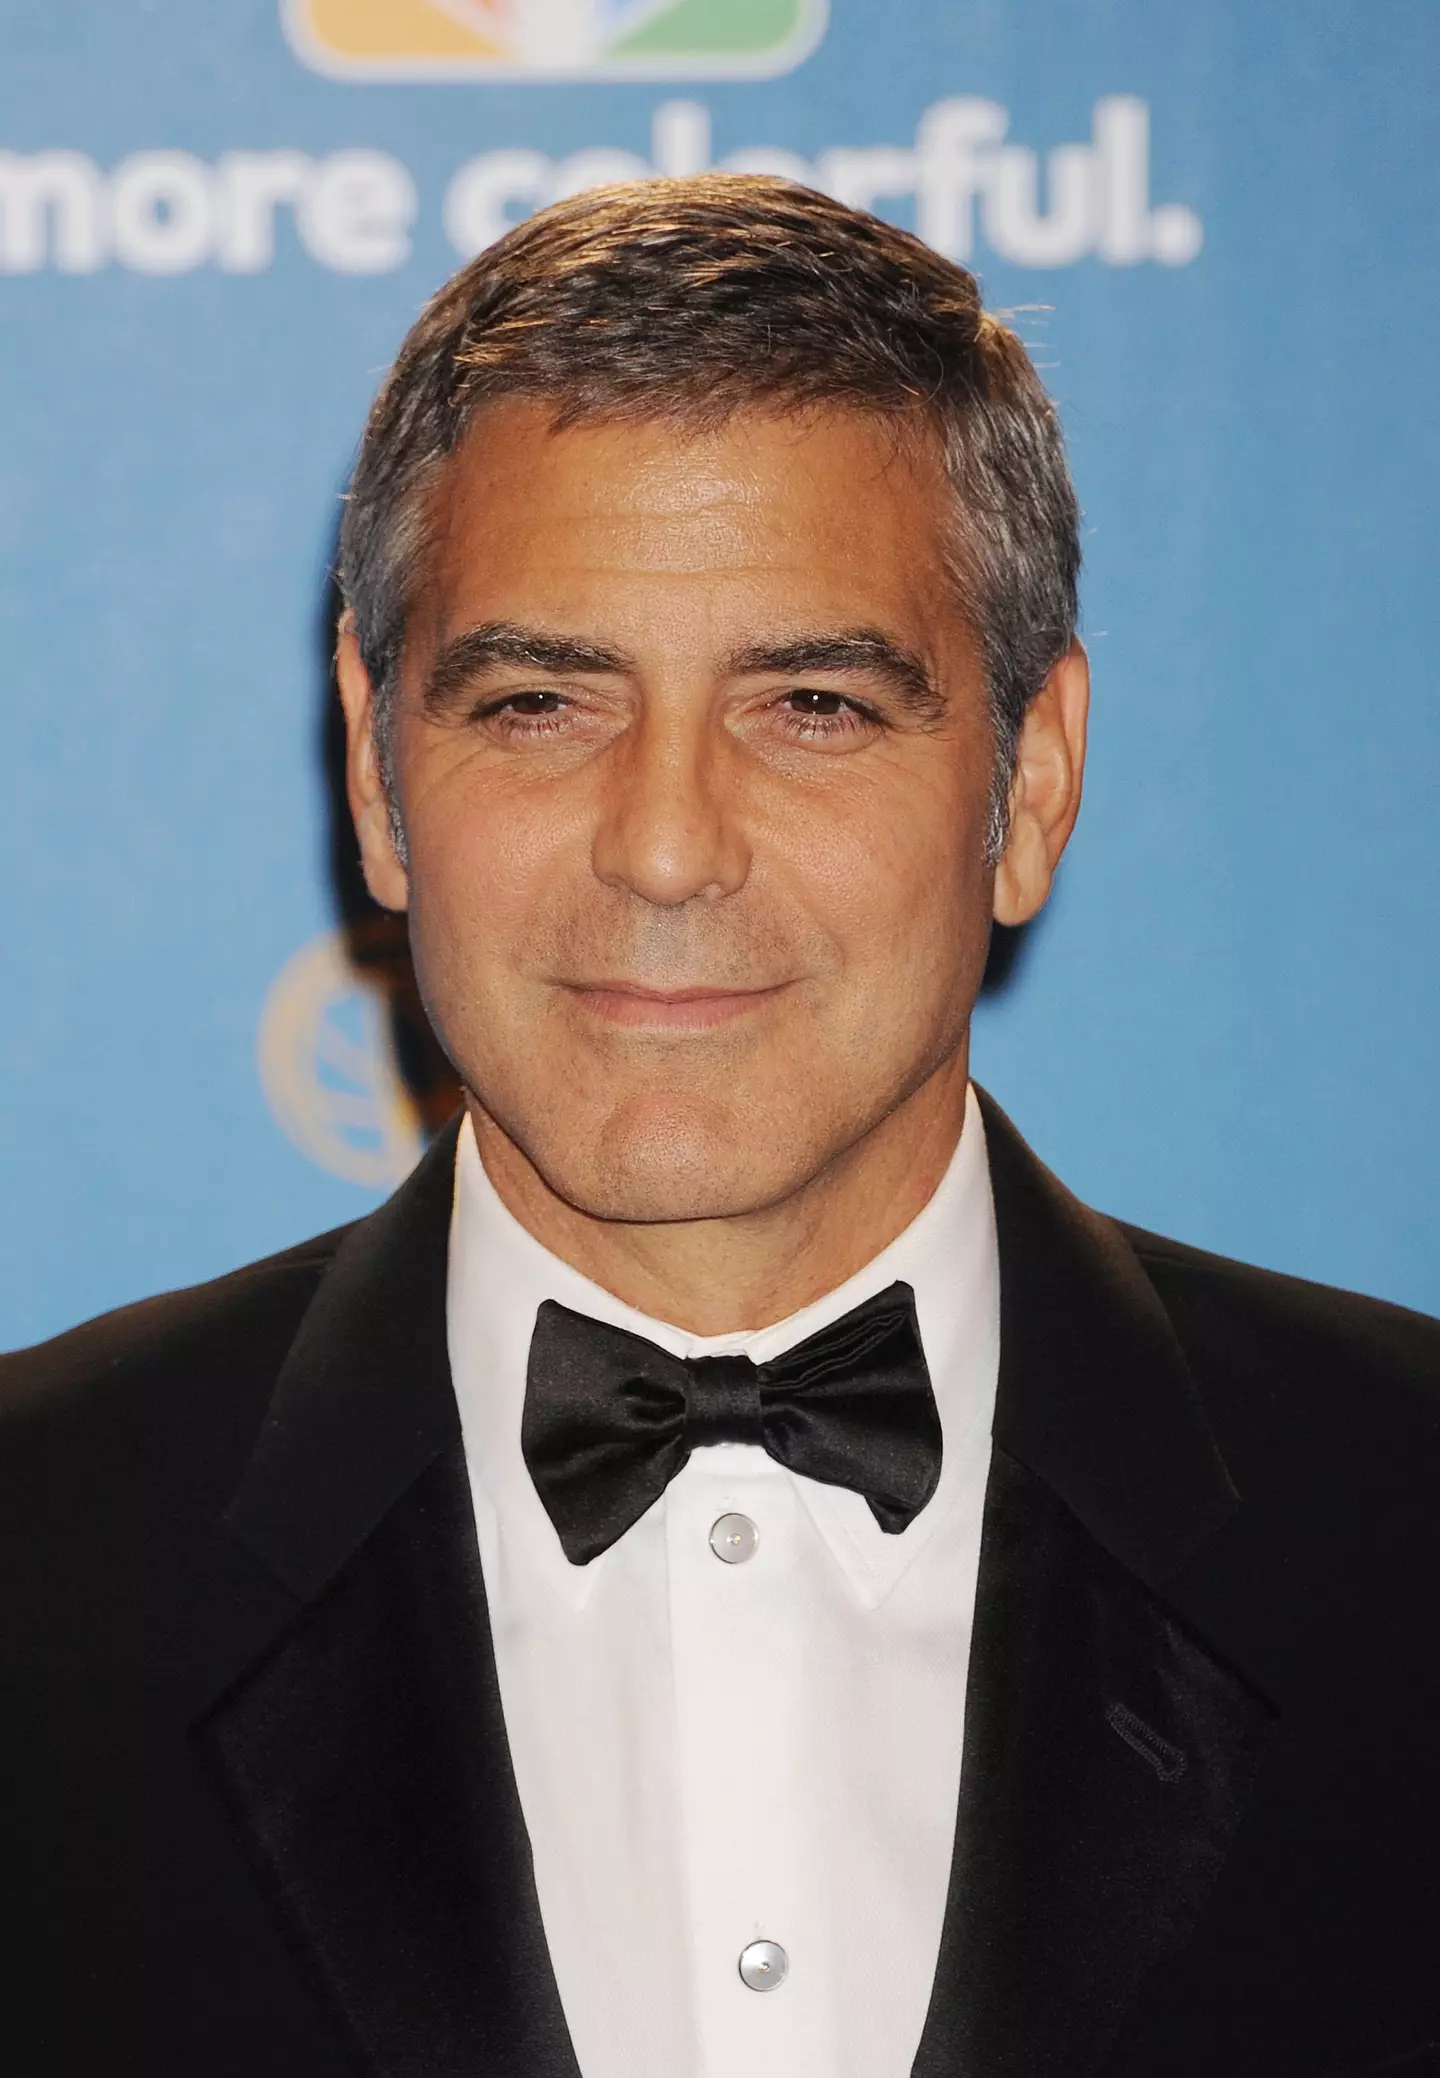 George Clooney was only paid $3 to star, write and direct this Oscar-nominated movie.